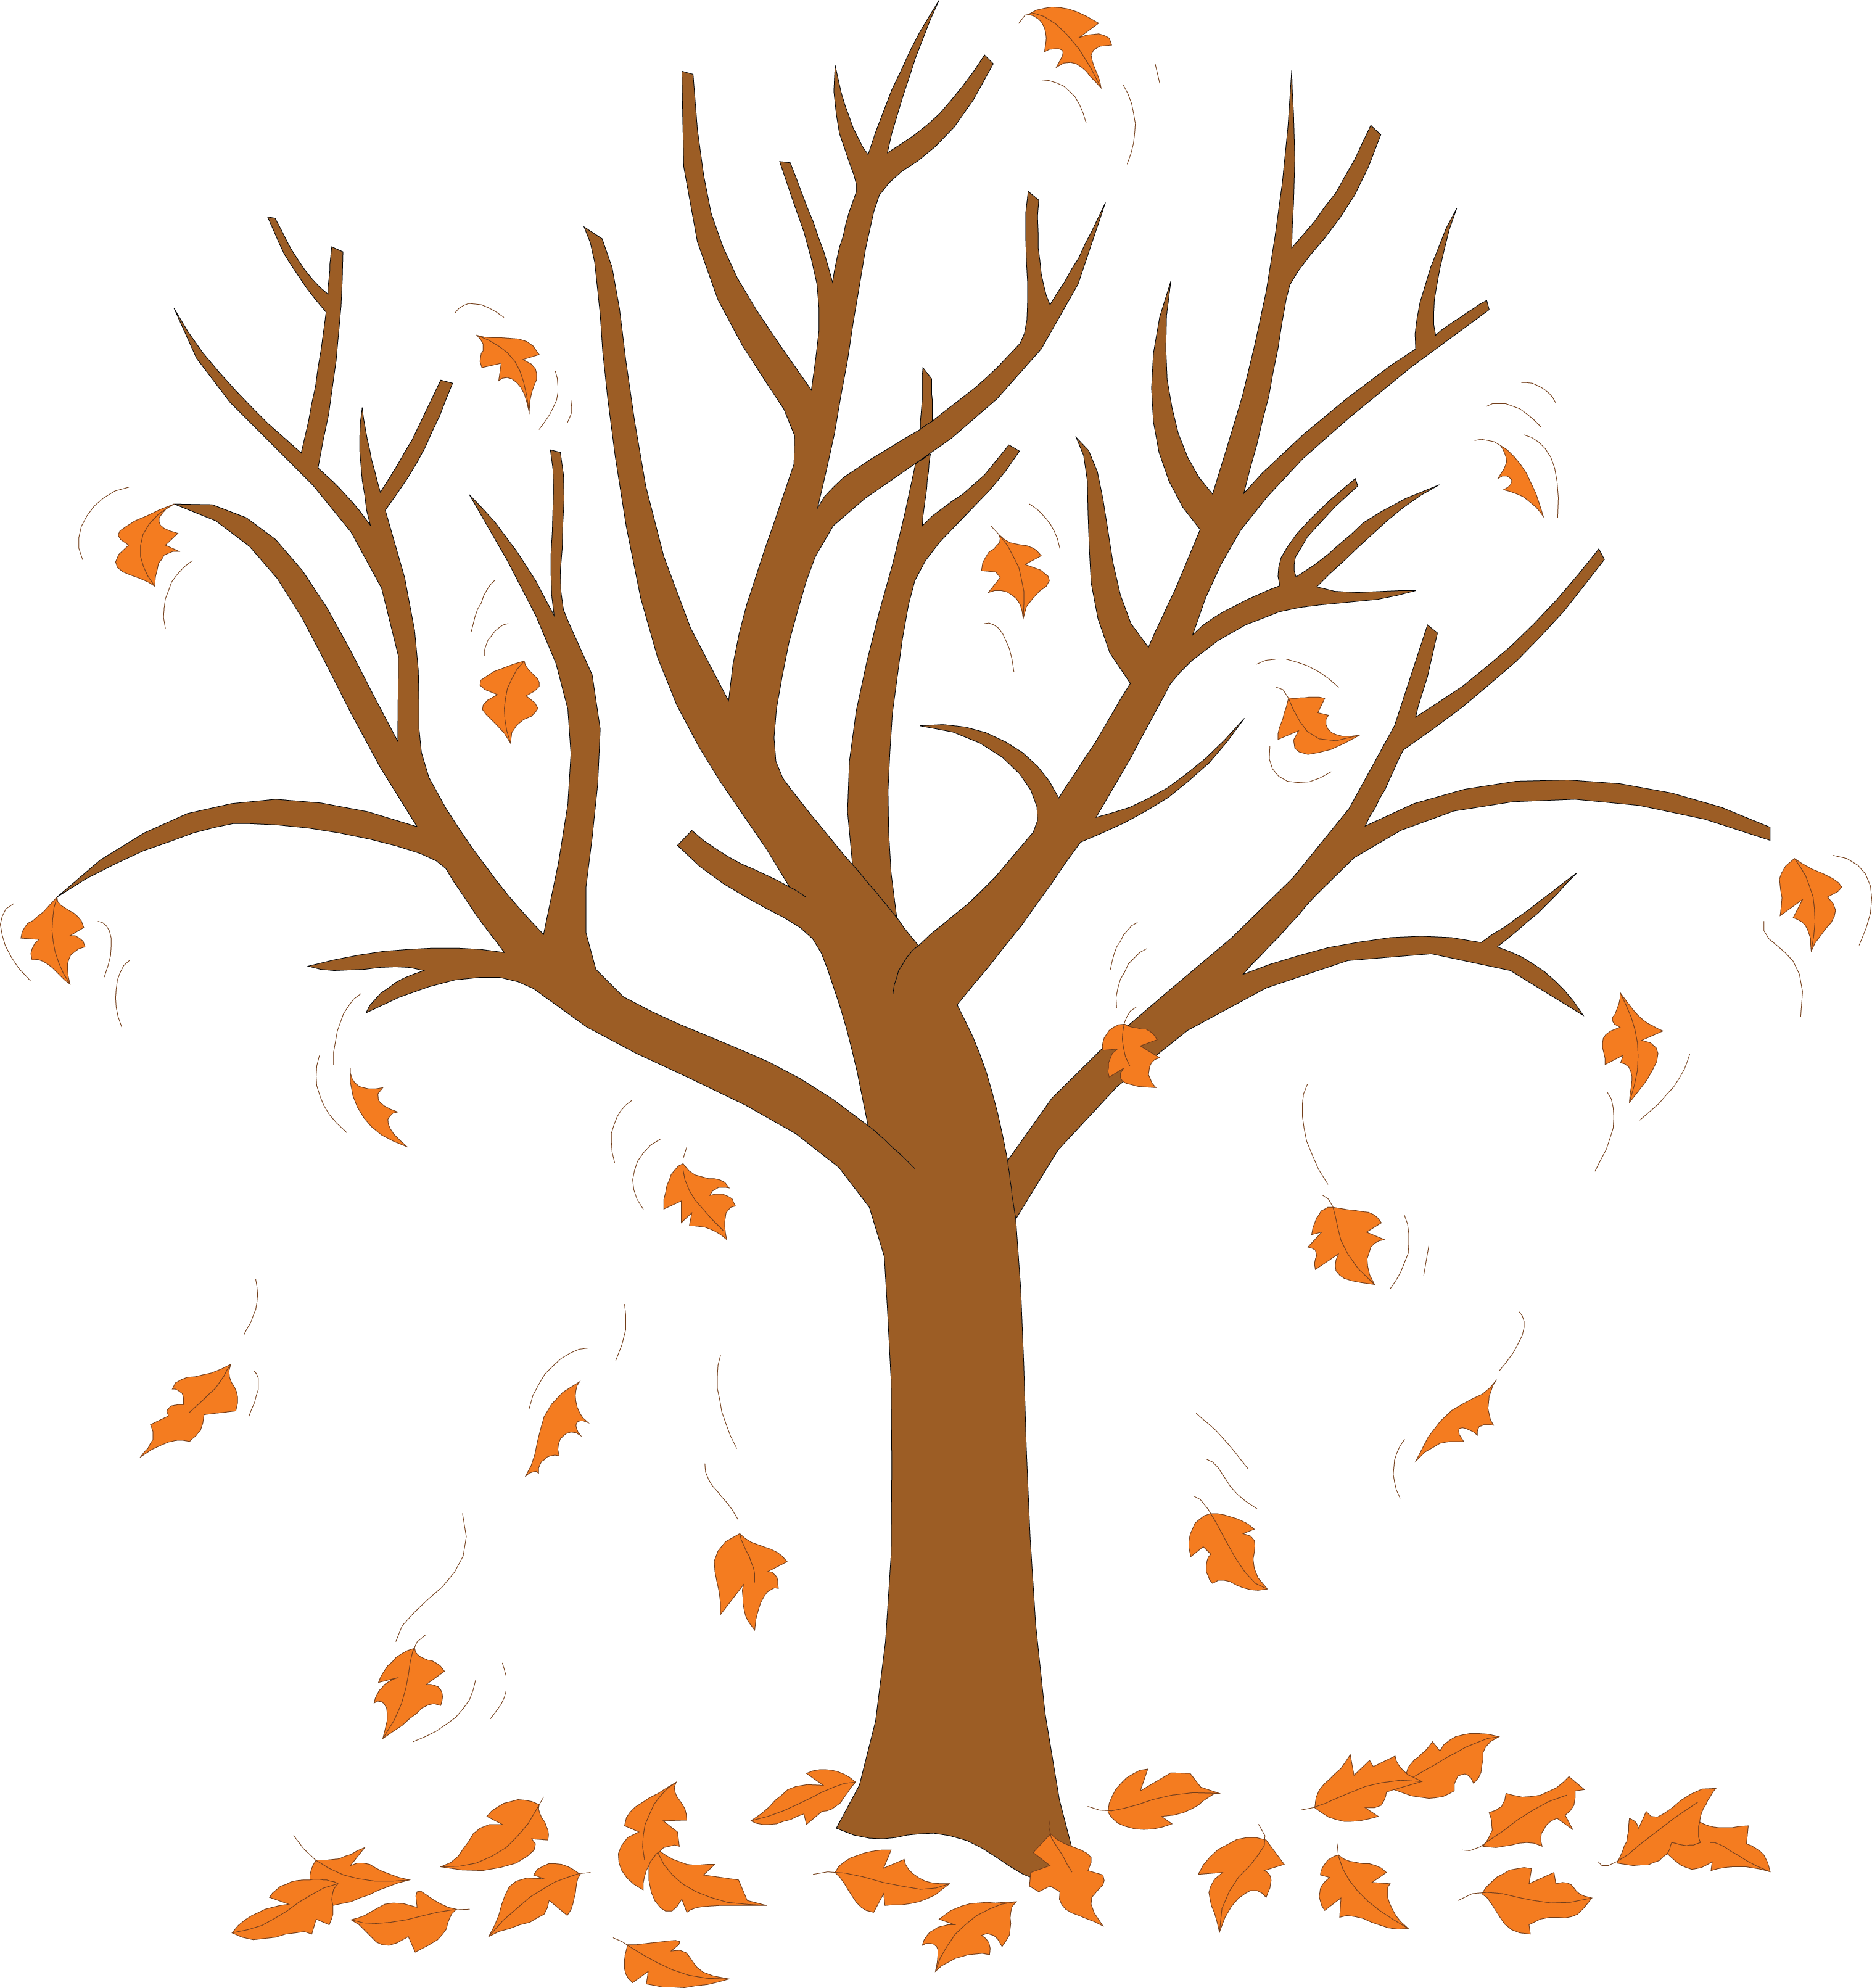 Trees Without Leaves Coloring Pages - Tree With Leaves Falling Off, Hd Png Download